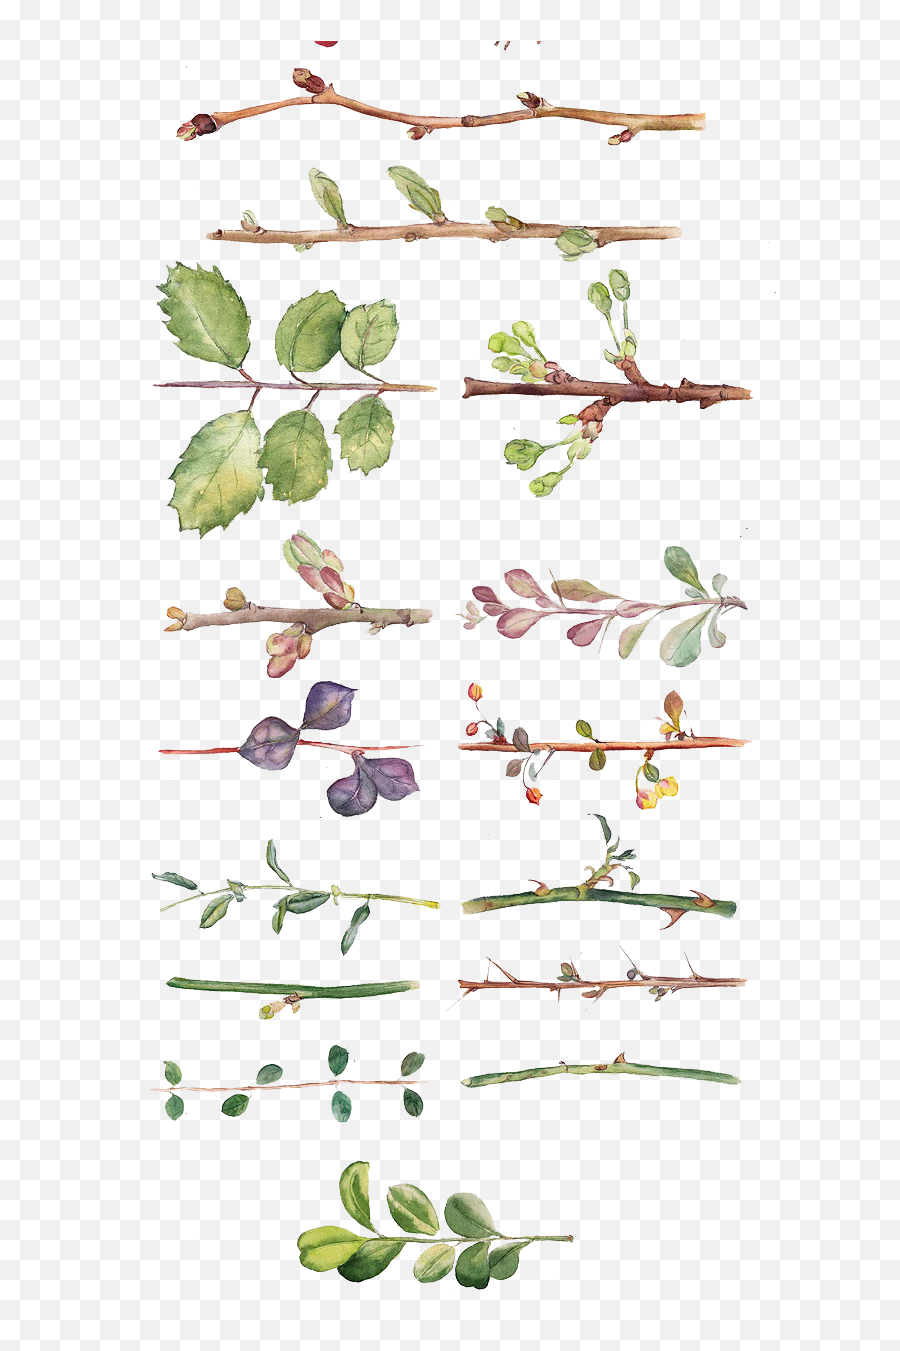 Watercolor Clipart Png - And All Flower Kinds Of Leaves Berry Emoji,Watercolor Clipart